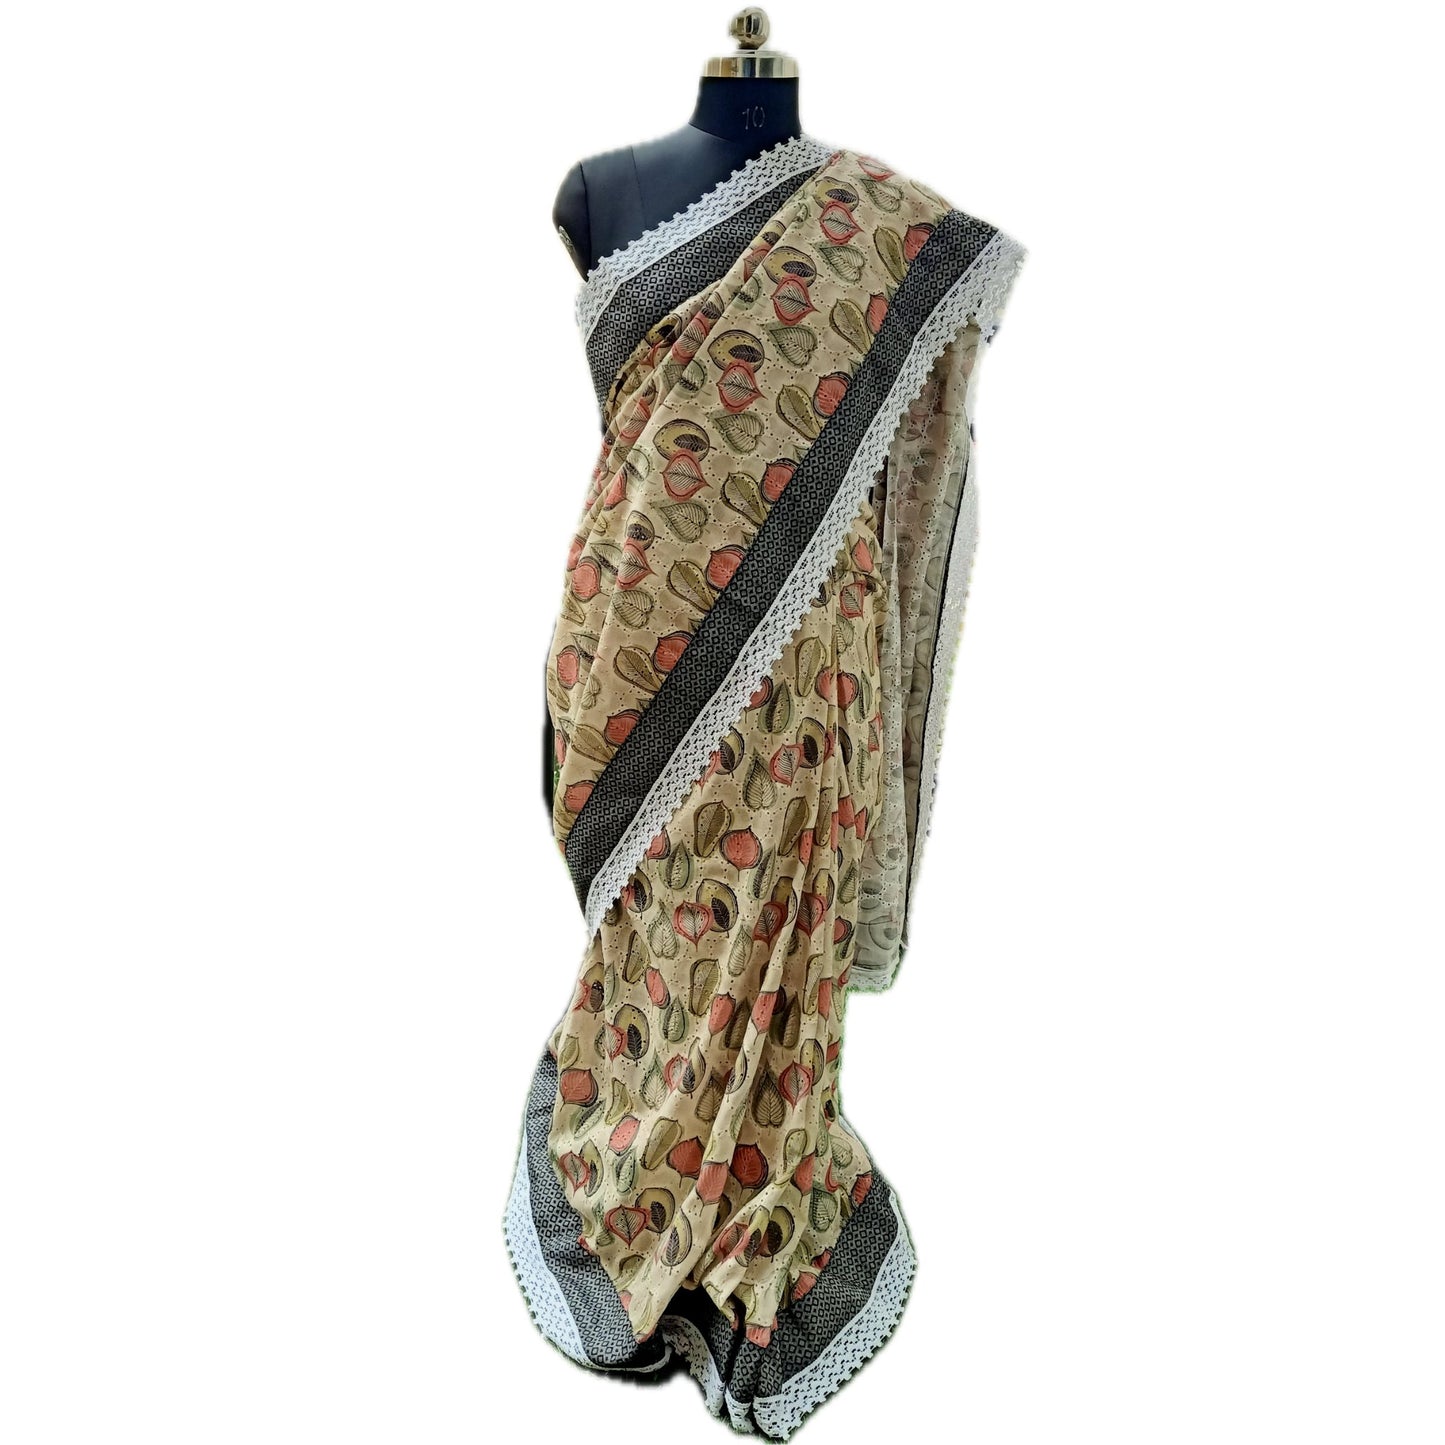 Beige-colored sari, crafted with pure hakoba fabric, featuring intricate detailing throughout the body. Adorned with delicate light ash and black borders, complemented by elegant white lace accents. Complete with a matching blouse piece